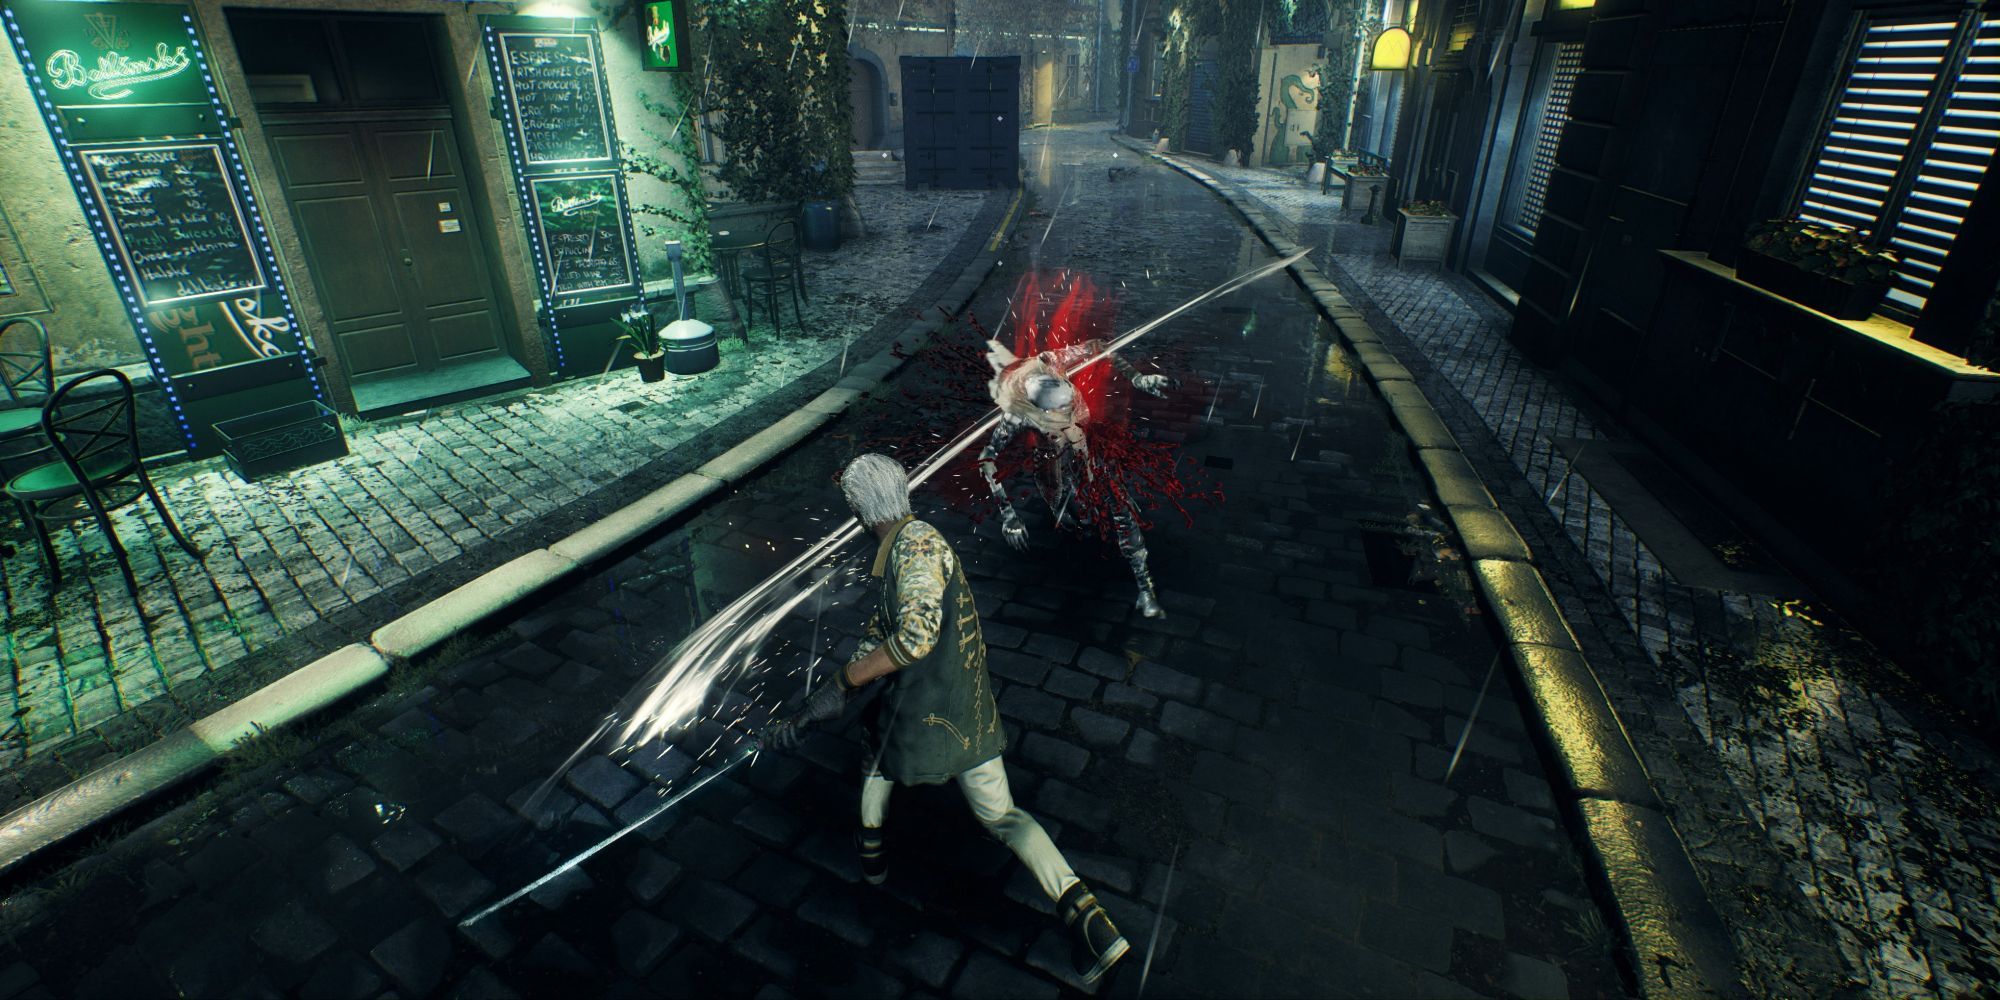 One Kindred slashes another with their sword in Vampire: The Masquerade - Bloodhunt